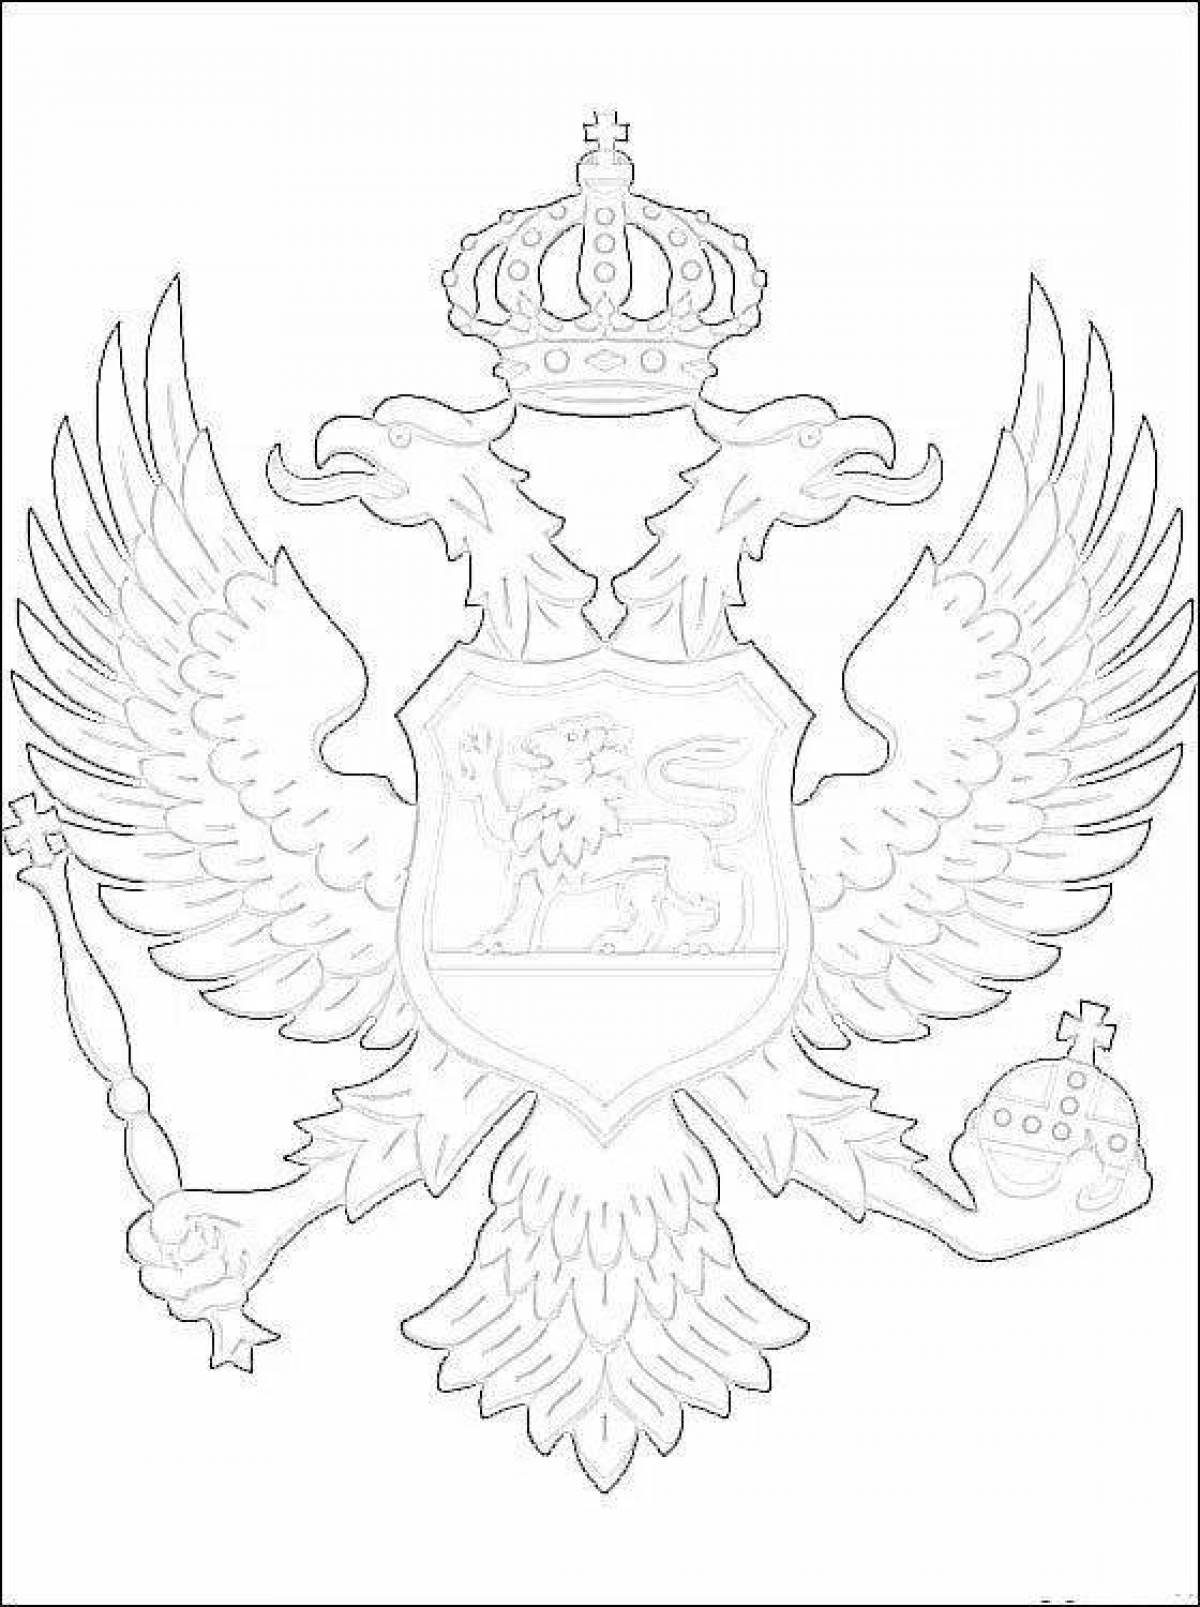 Coloring grandure coat of arms of the russian federation